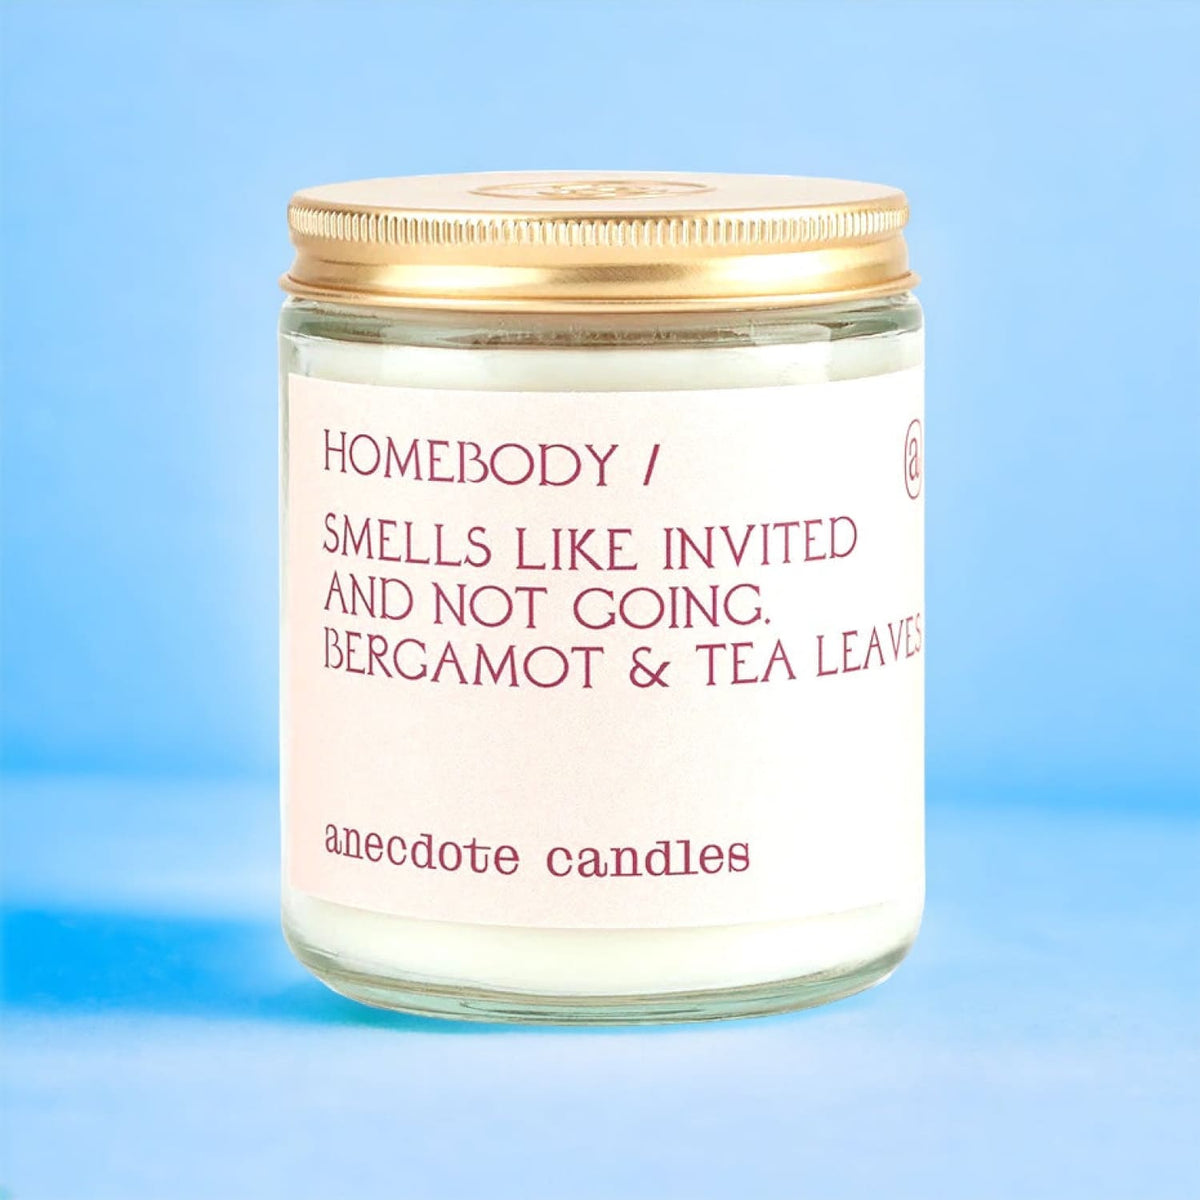 Anecdote Candles 7.8 Oz Candle Homebody Anecdote Candle -